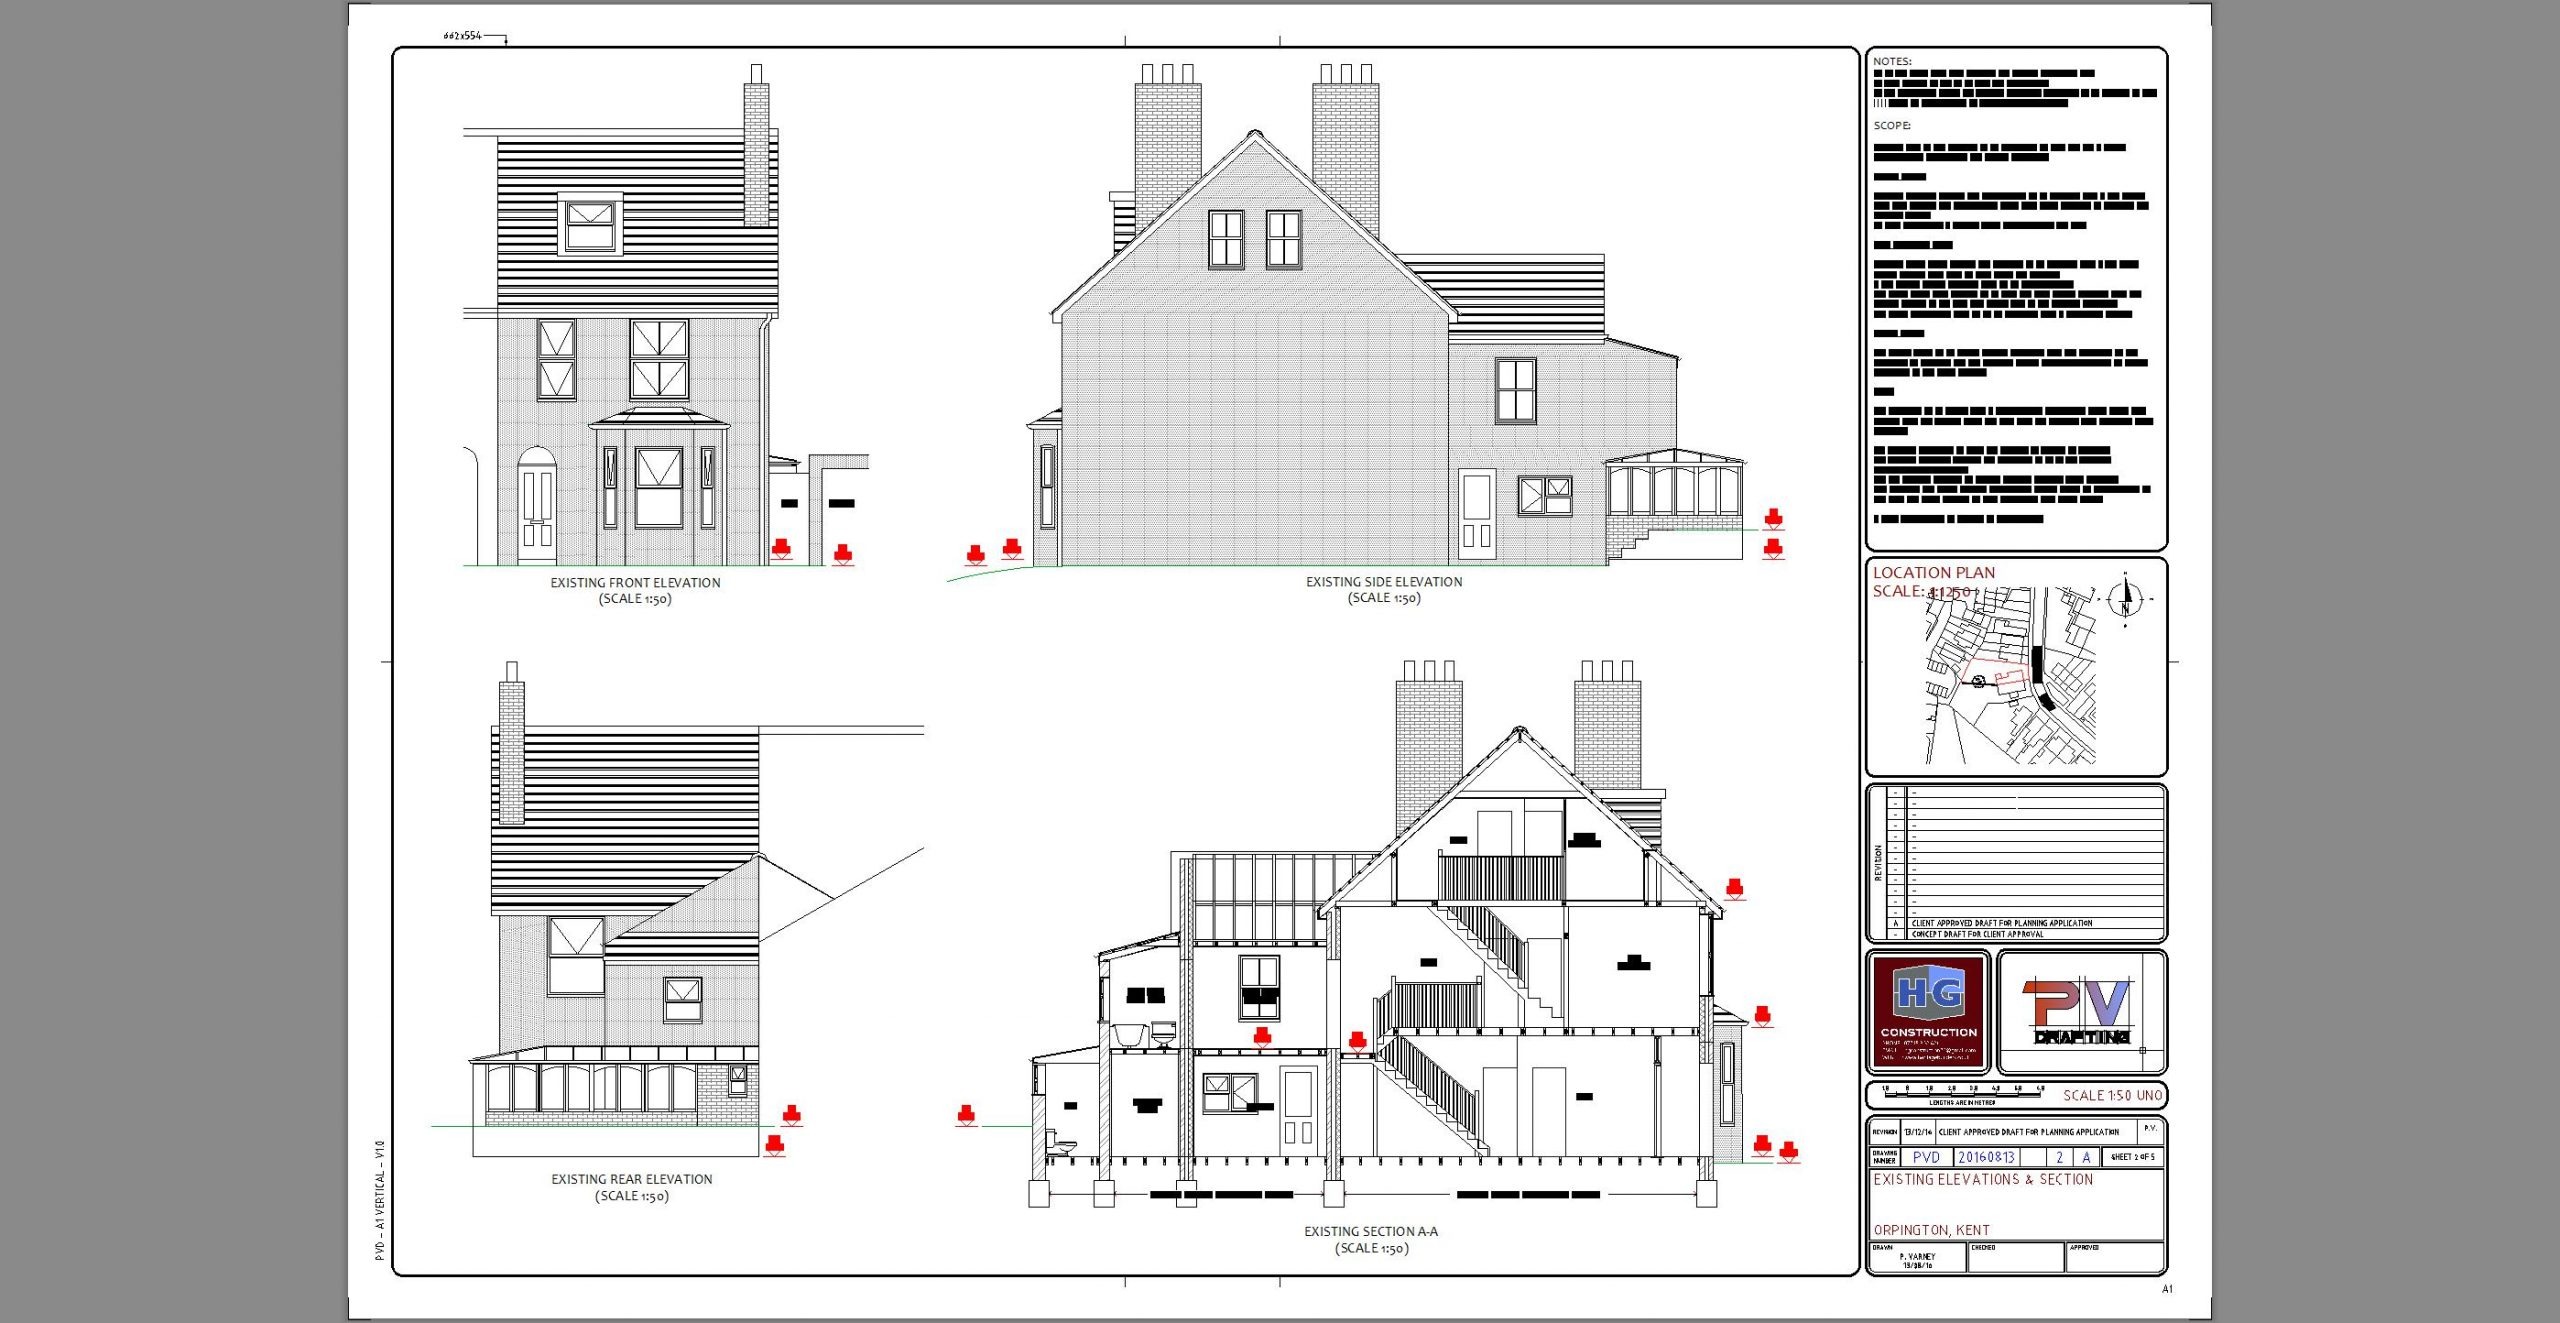 Planning Drawing - Orpington Kent - Existing Elevations